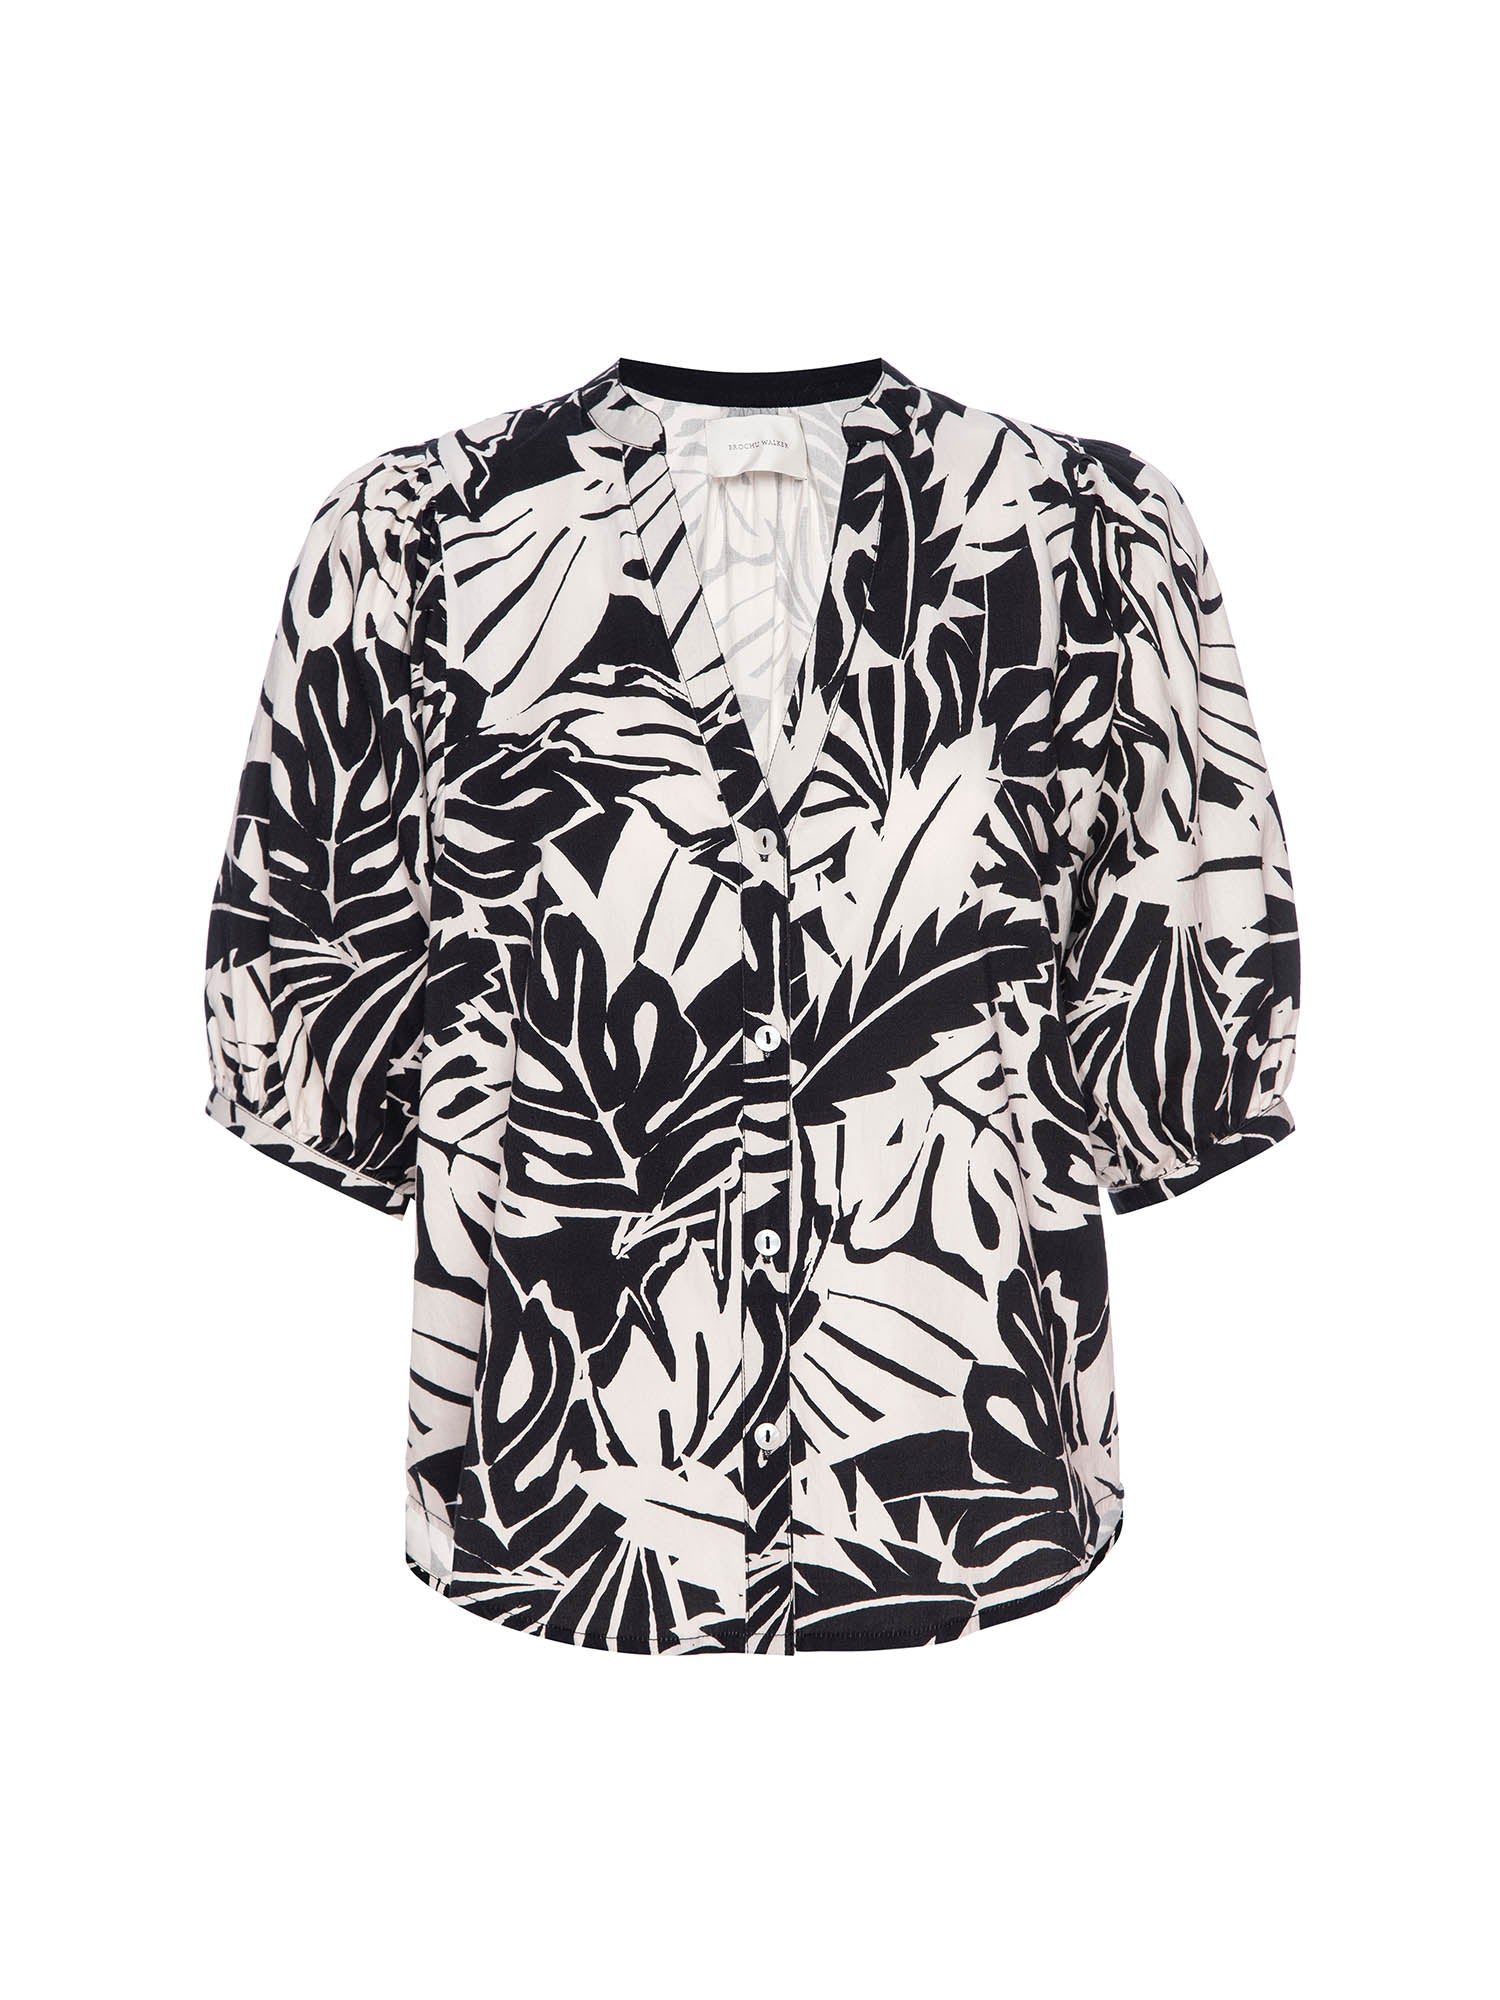 Asteria black and white printed blouse flat view